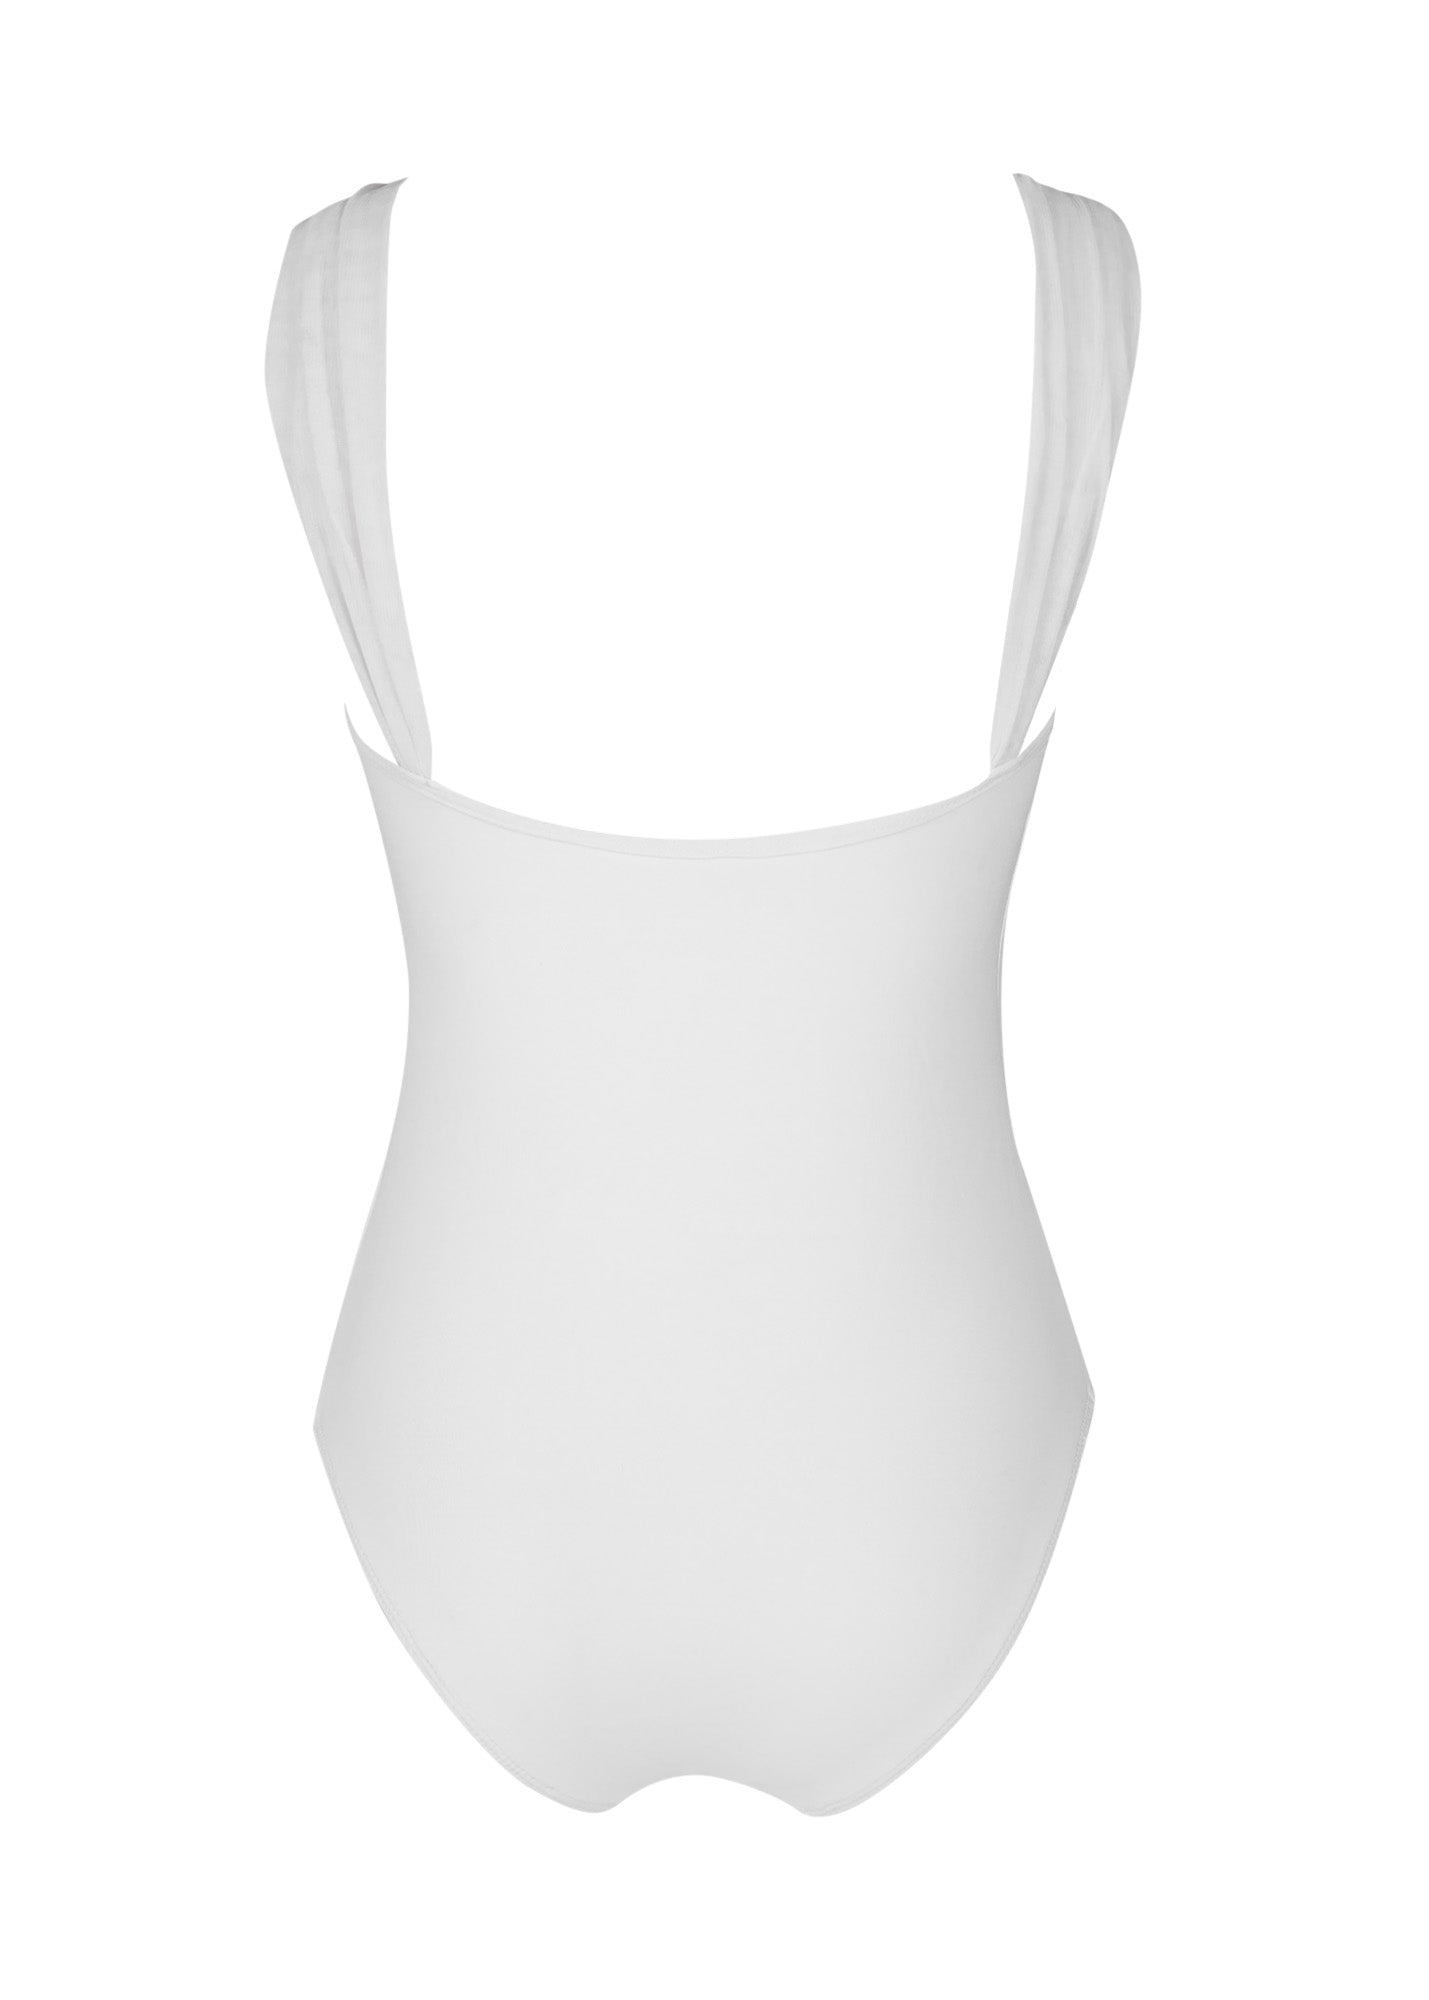 white one-piece swimsuit with mesh straps and chiffon flowers